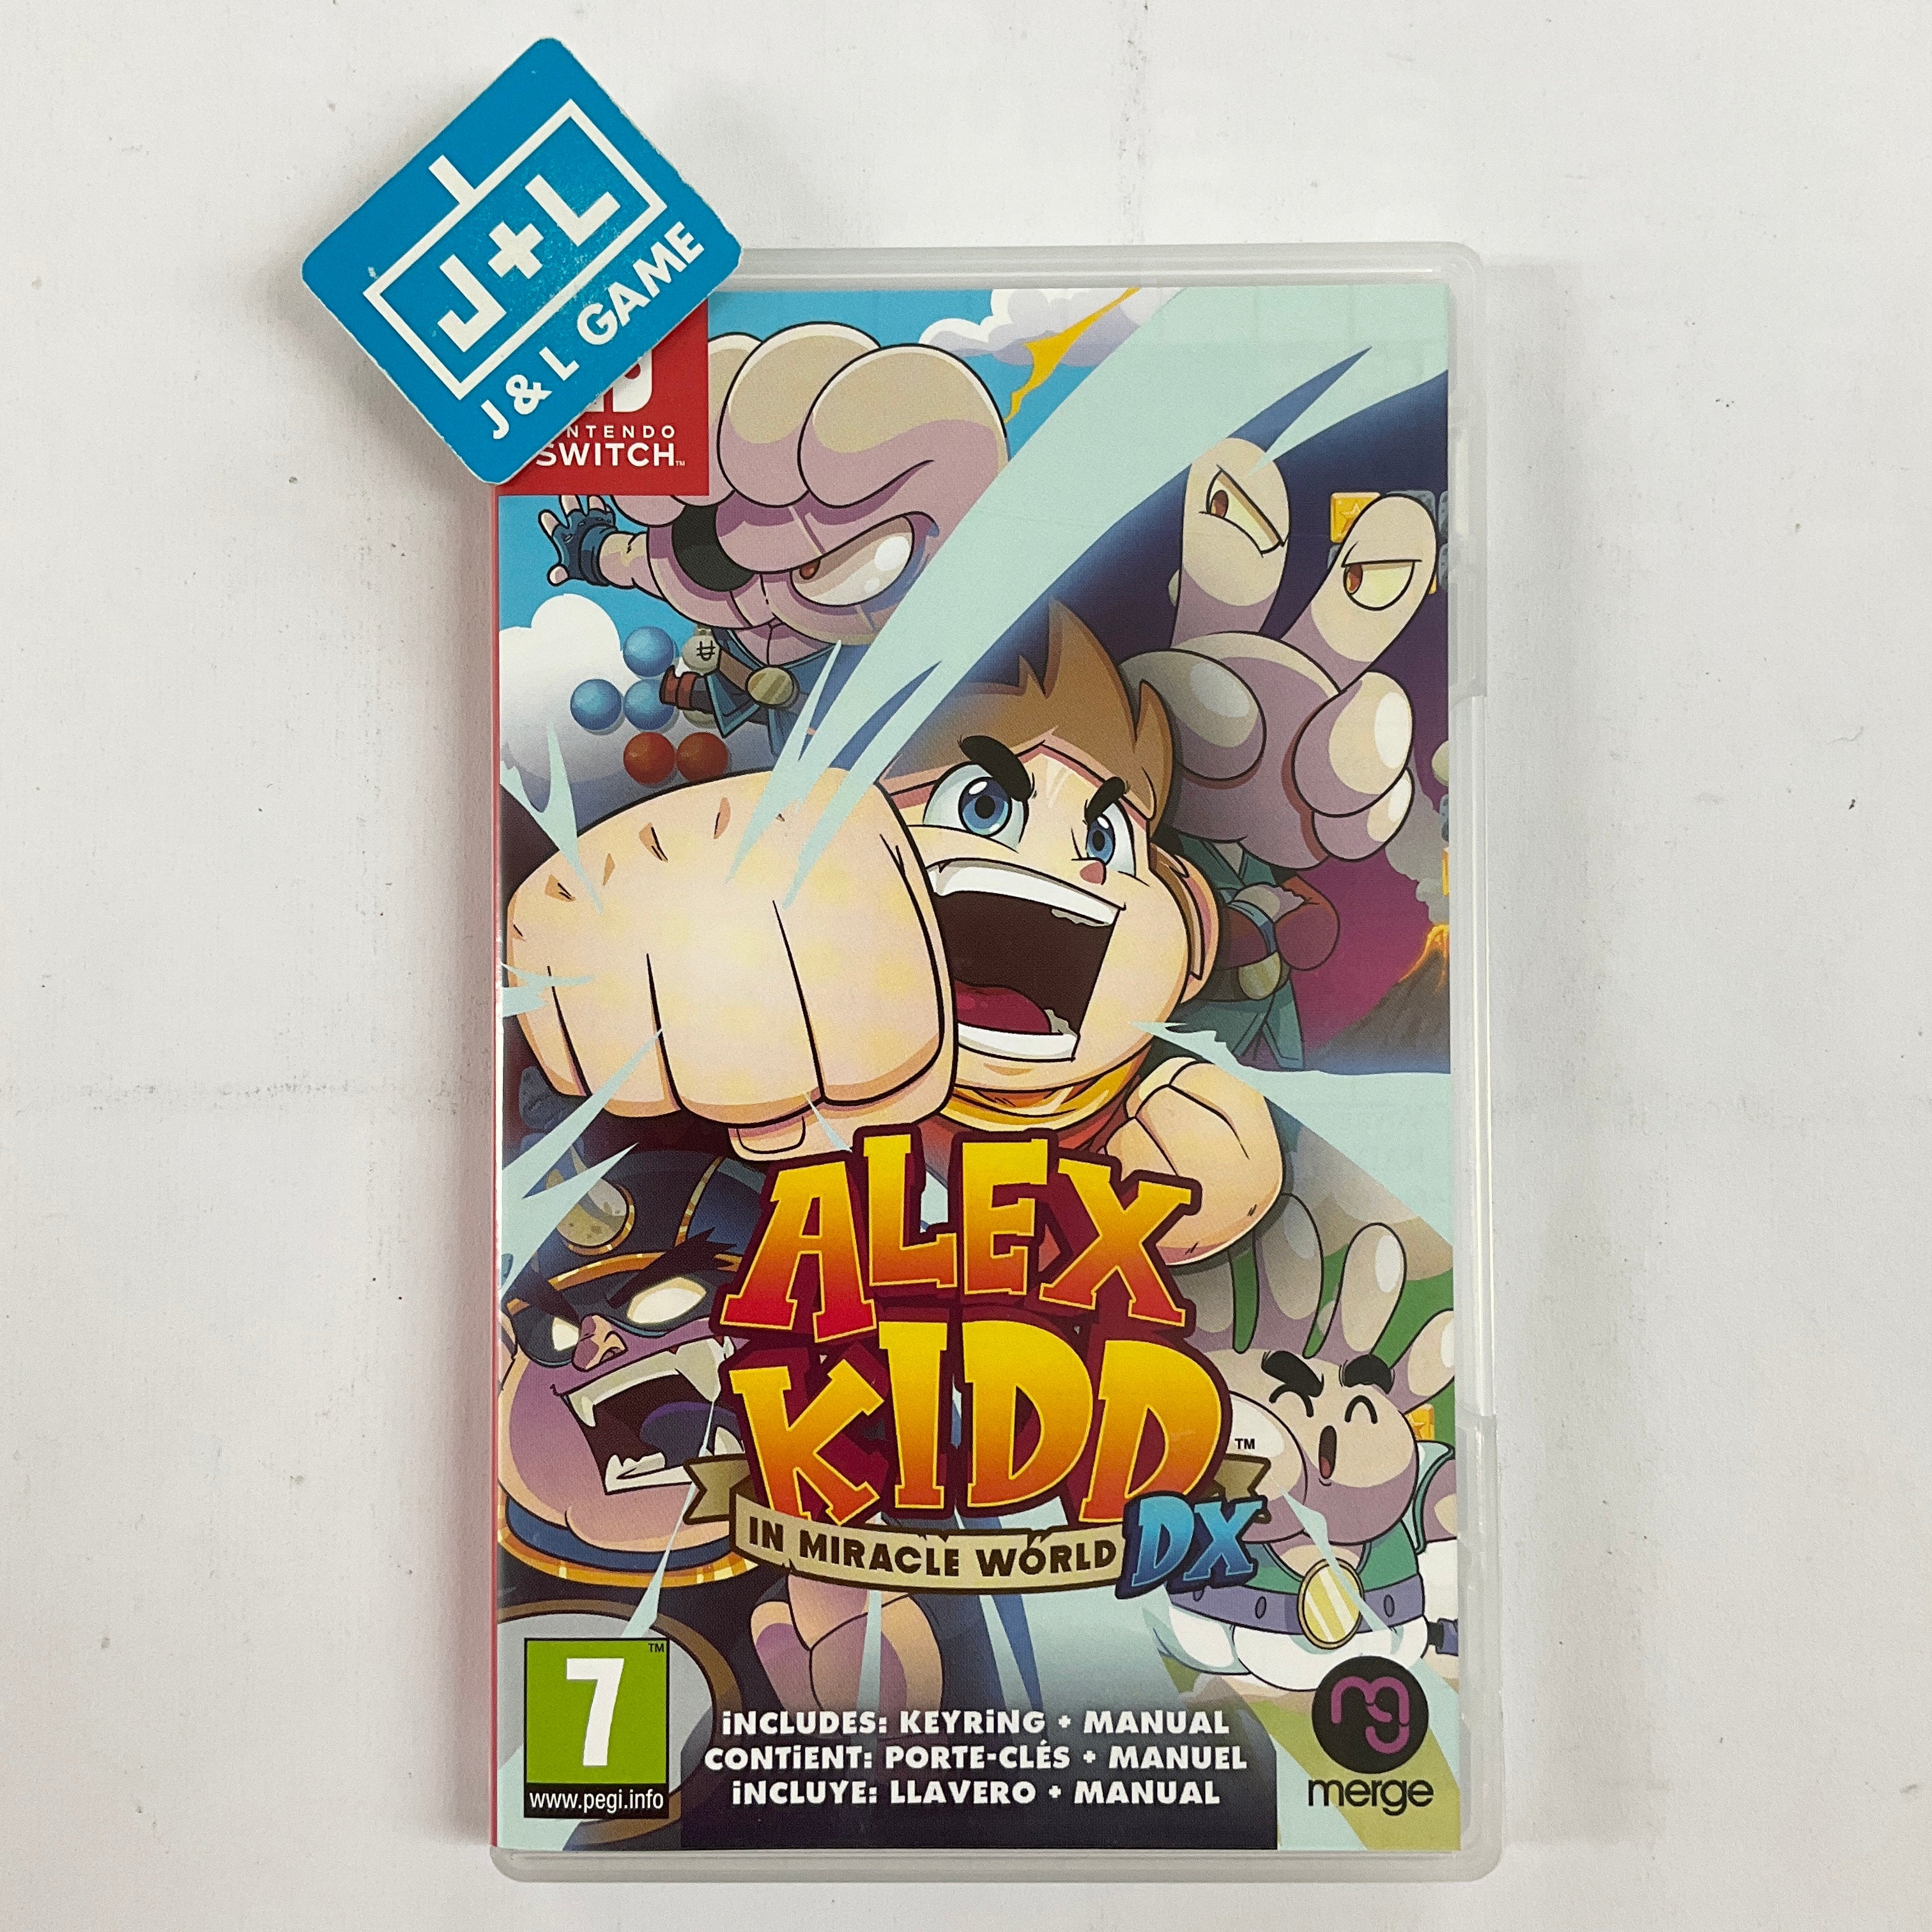 Alex Kidd In Miracle World DX - (NSW) Nintendo Switch [Pre-Owned] (European Import) Video Games Merge Games   